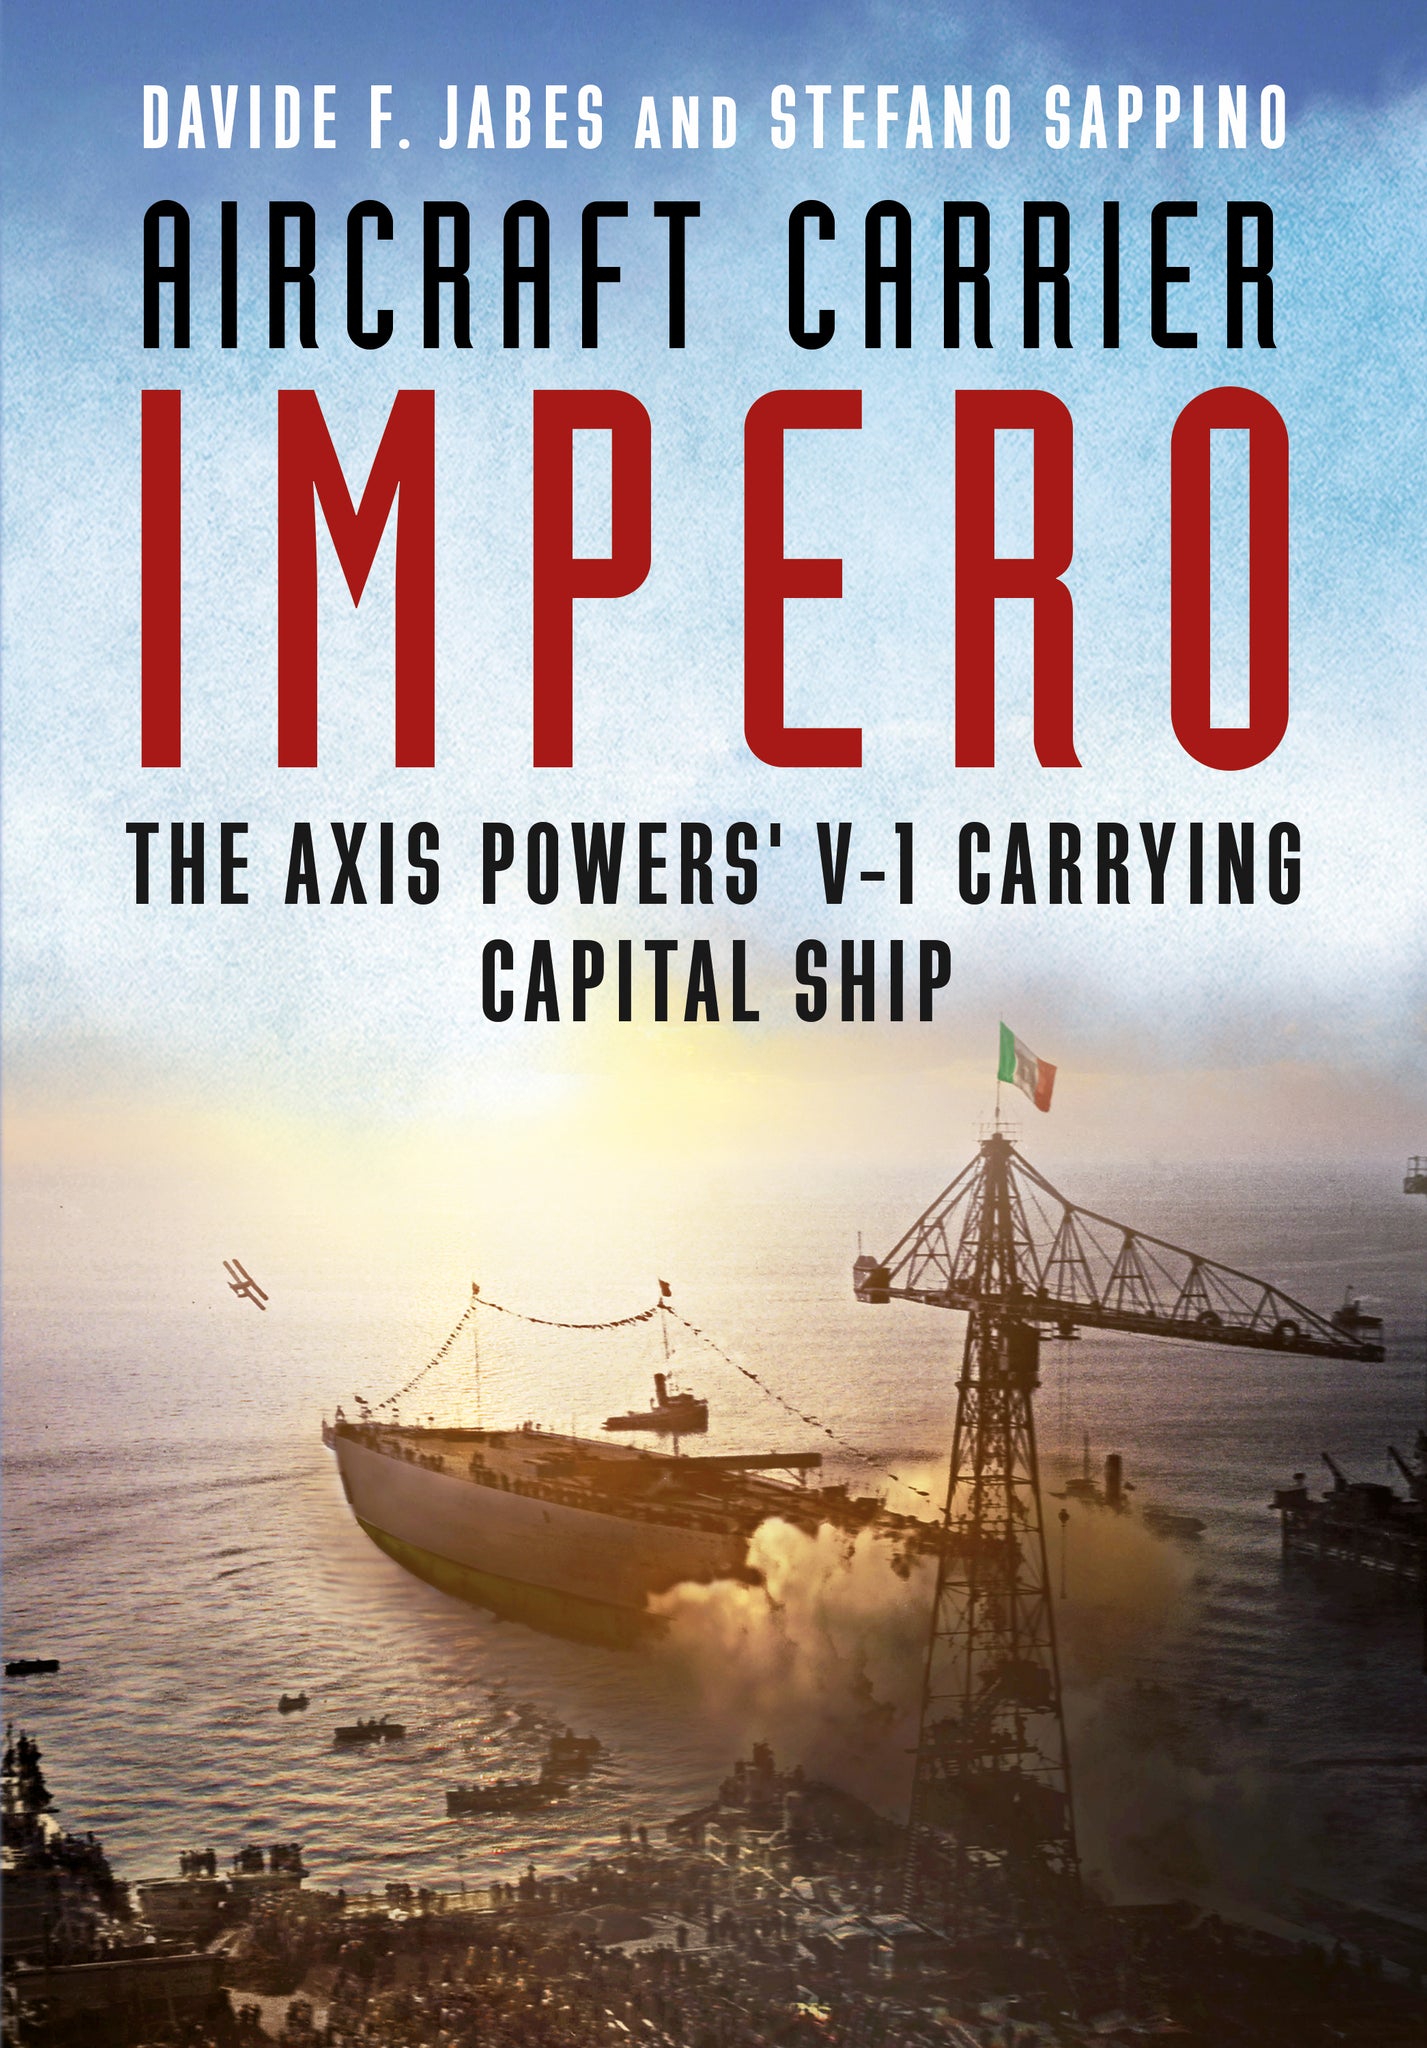 Aircraft Carrier Impero - available from Fonthill Media